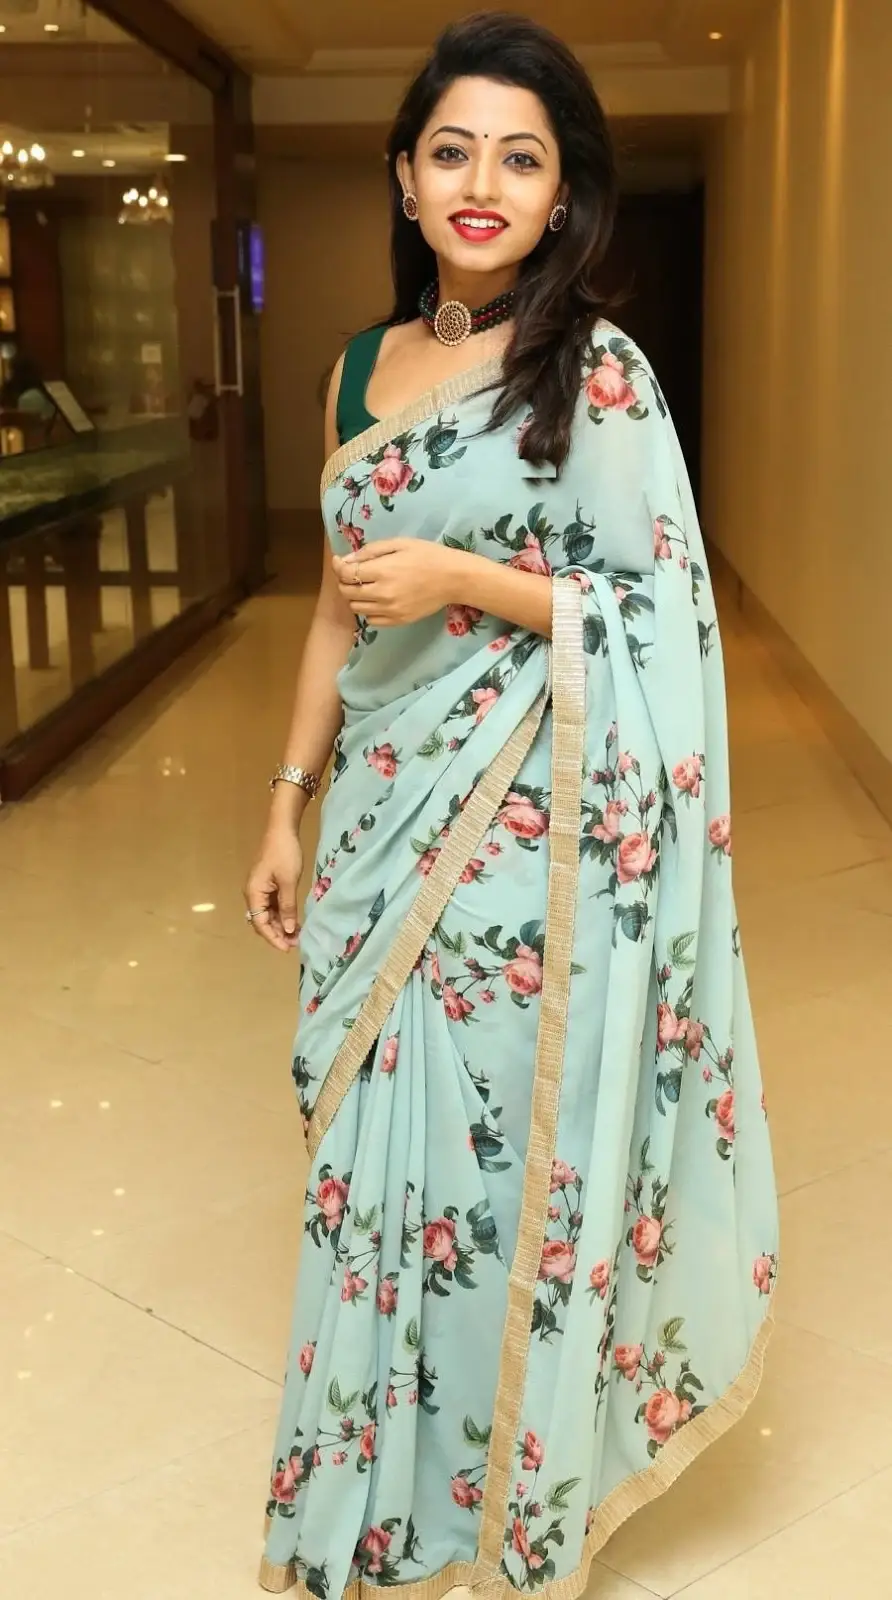 INDIAN TELEVISION ACTRESS NAVYA SWAMY IN BLUE SAREE